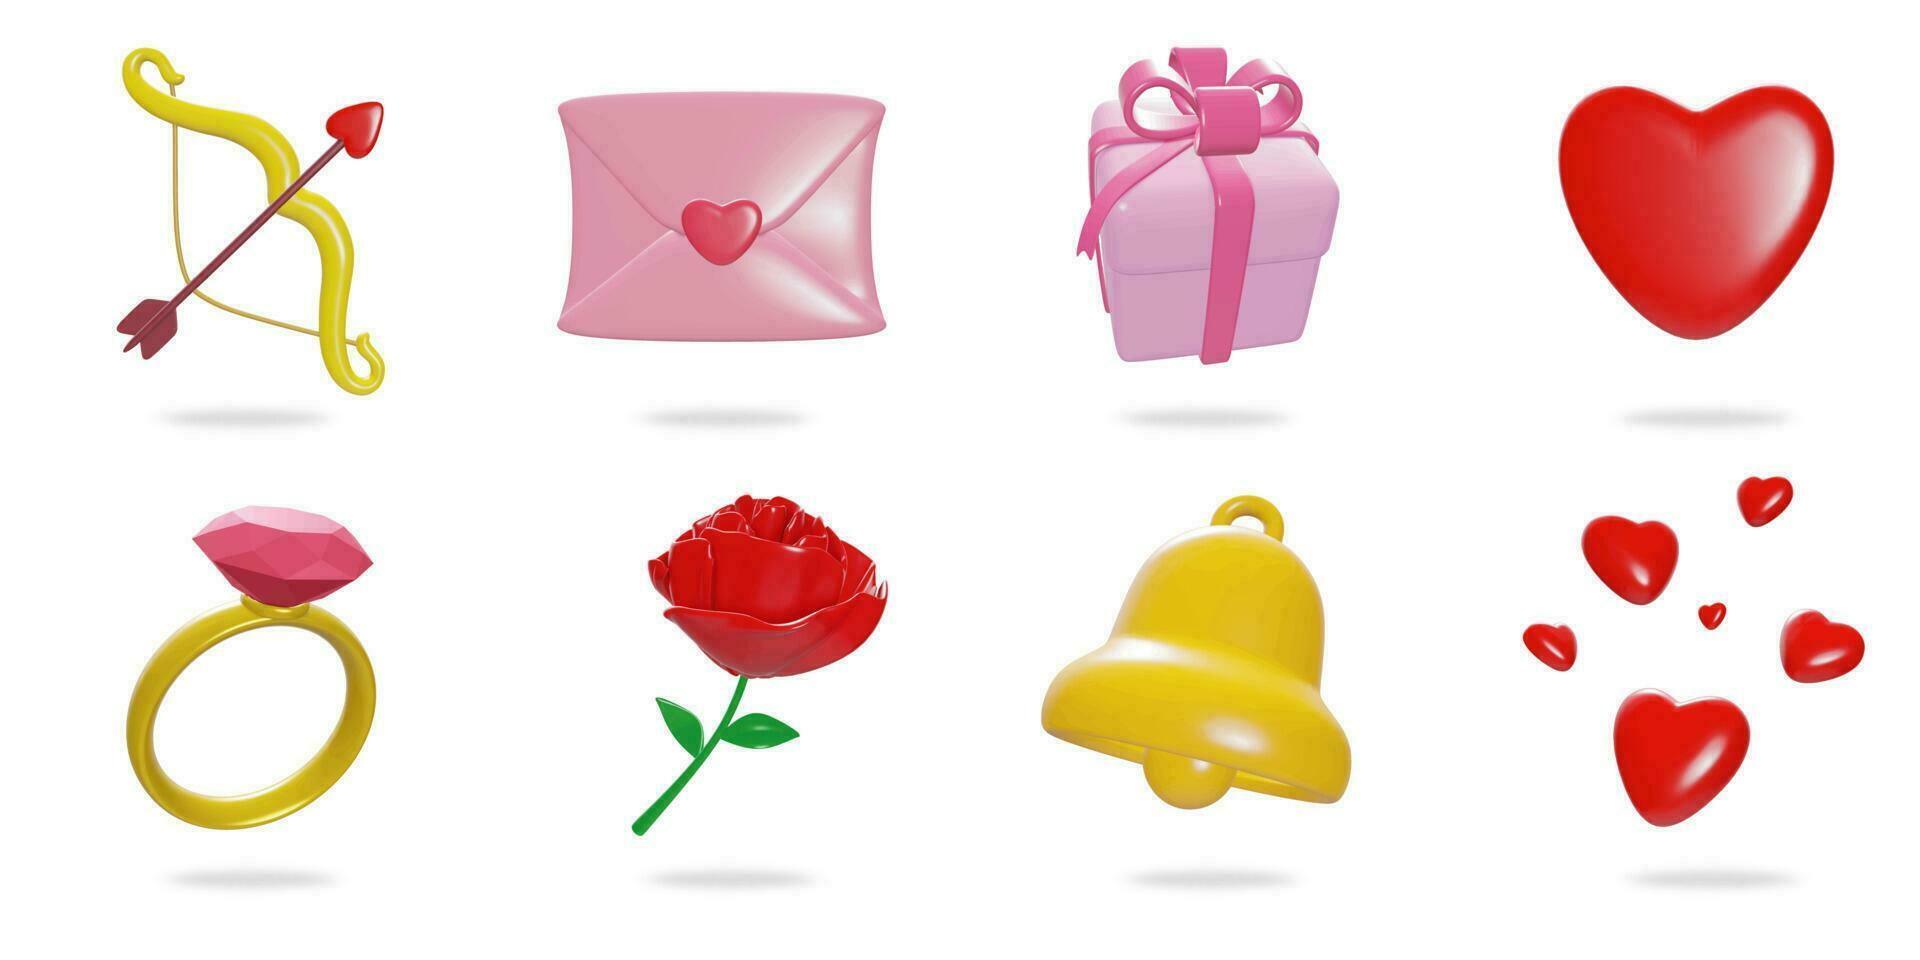 3d rendering. Valentine's icon set on a white background.bow,letter,gift box,heart,ring,rose,bell vector